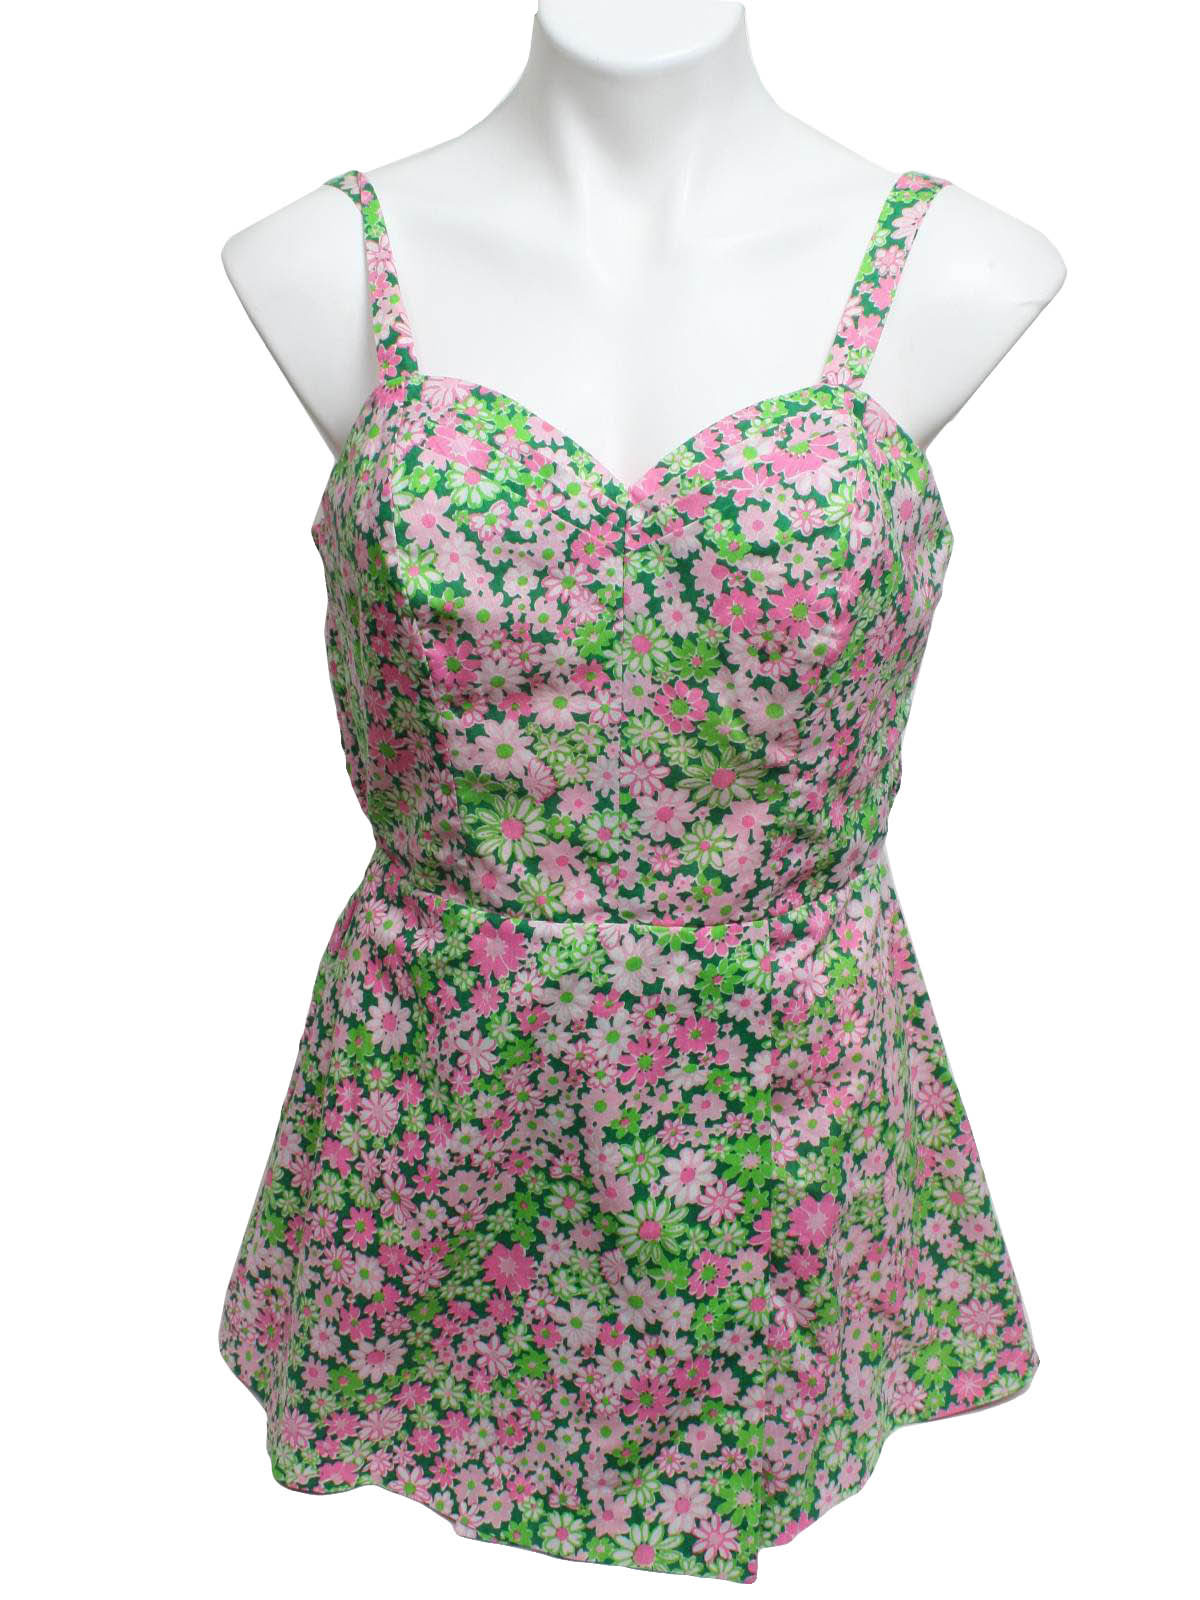 Retro Seventies Swimsuit/Swimwear: Early 70s -Lilly- Womens shaded ...